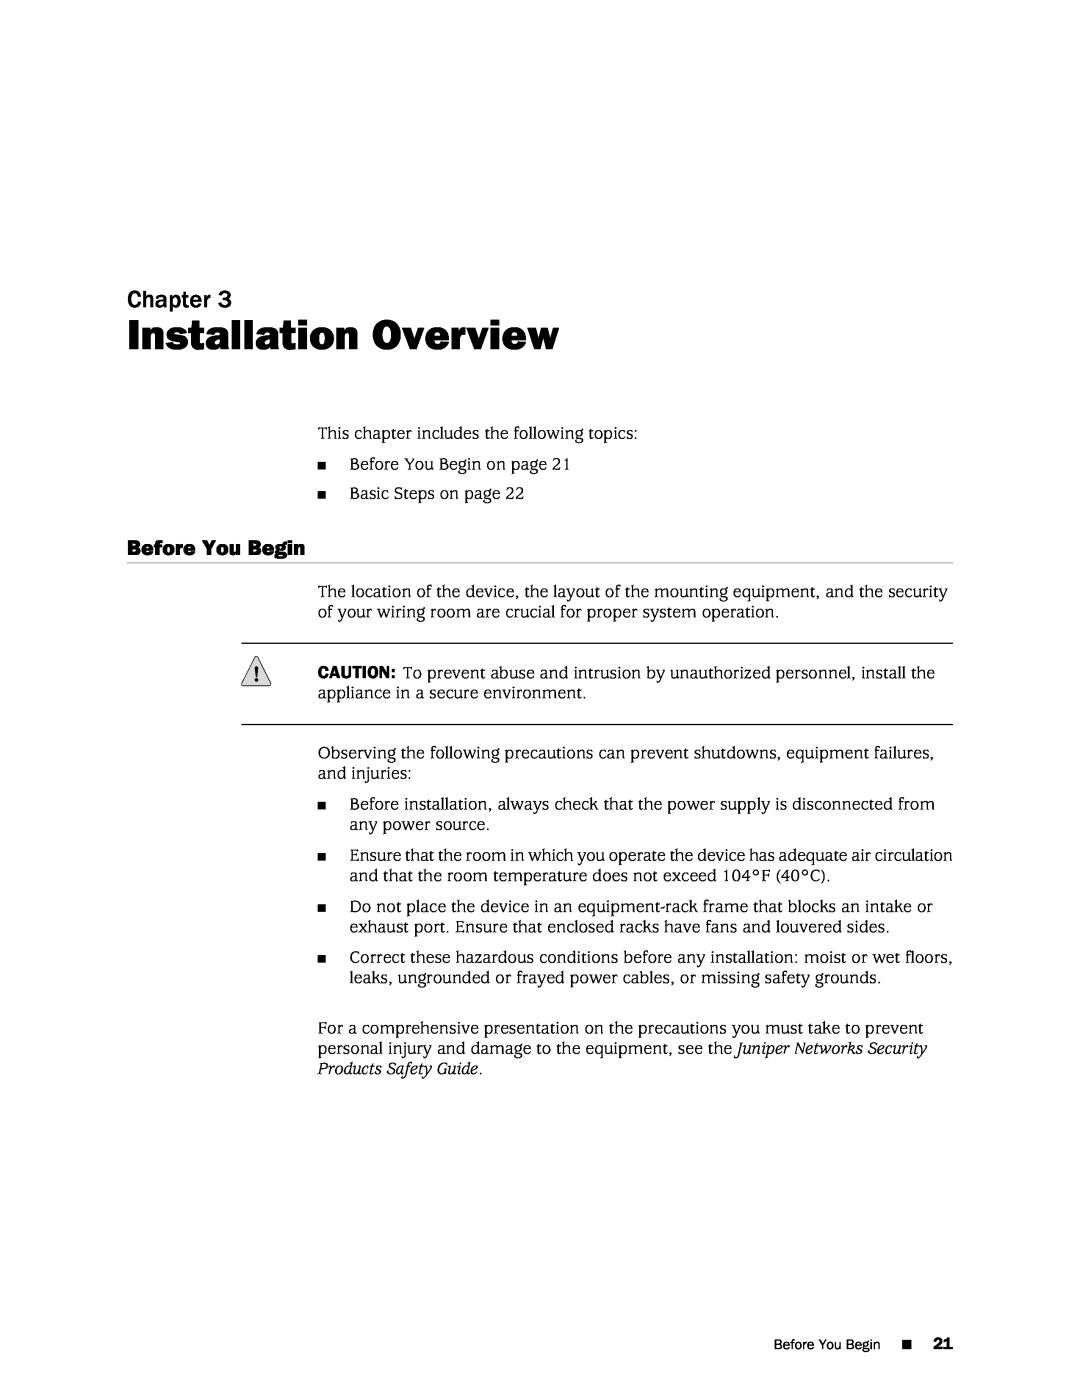 Juniper Networks IDP250 manual Installation Overview, Before You Begin, Chapter 